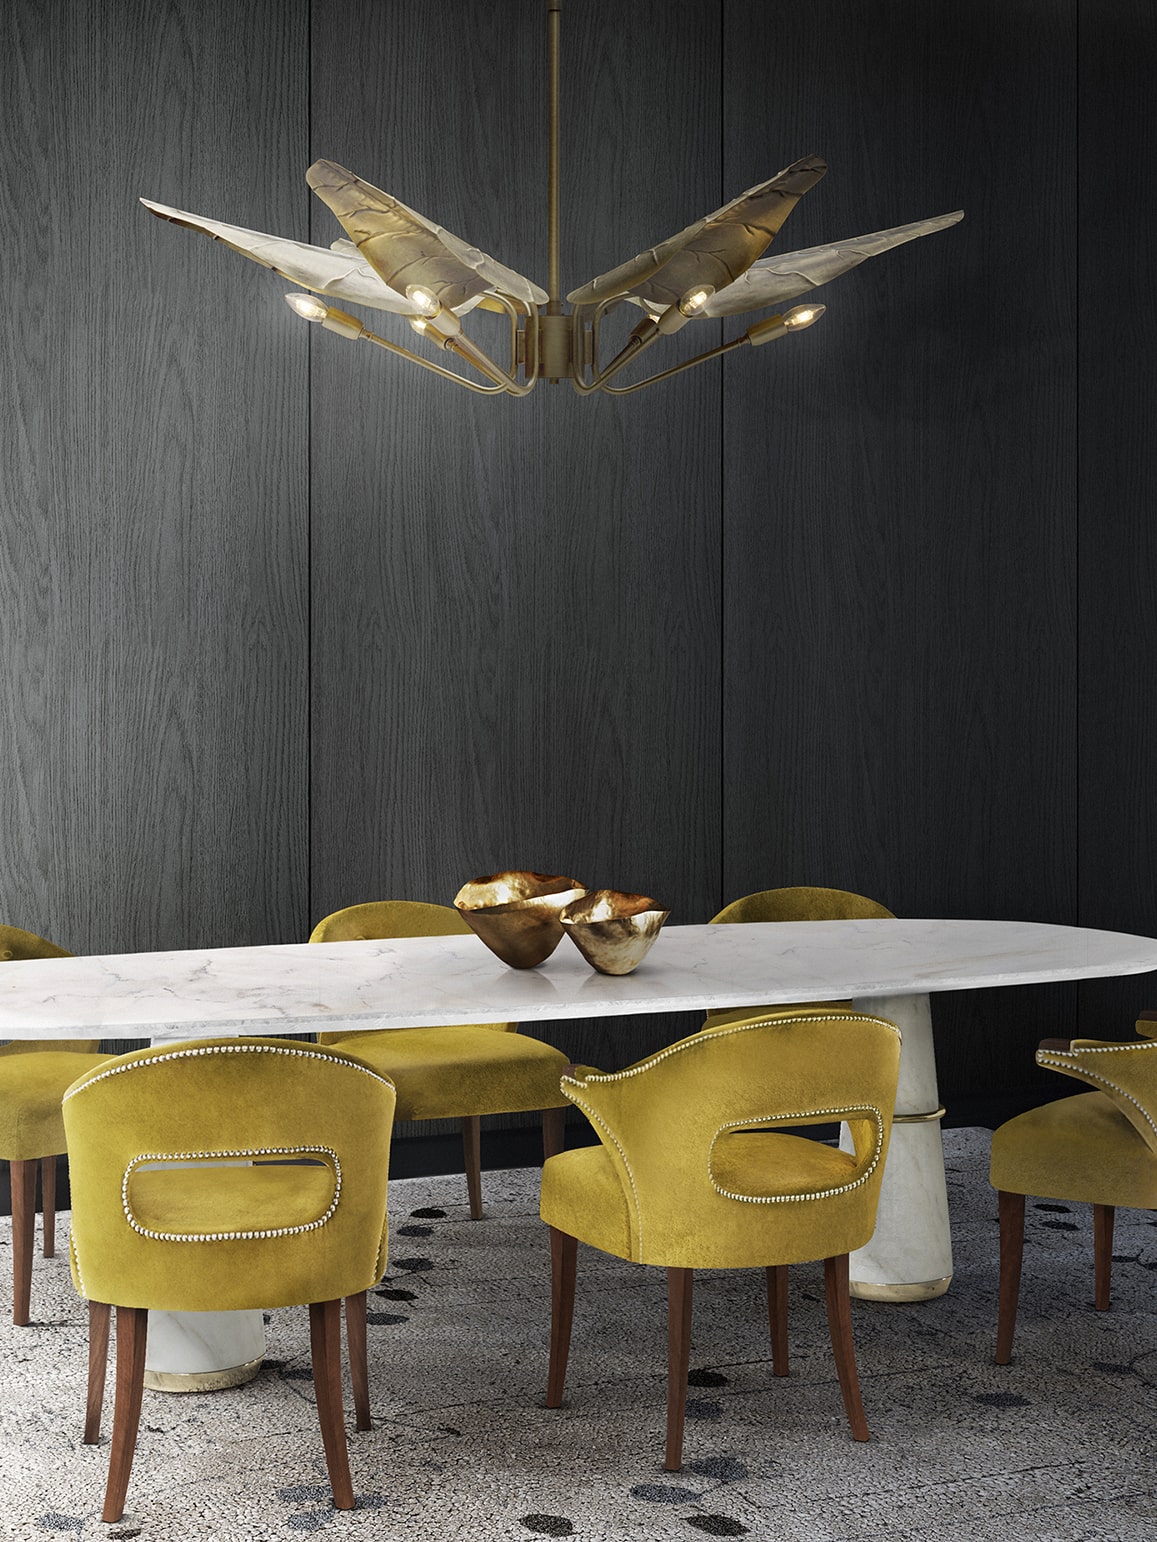 Contemporary Dining Room With Yellow Chairs - Home'Society